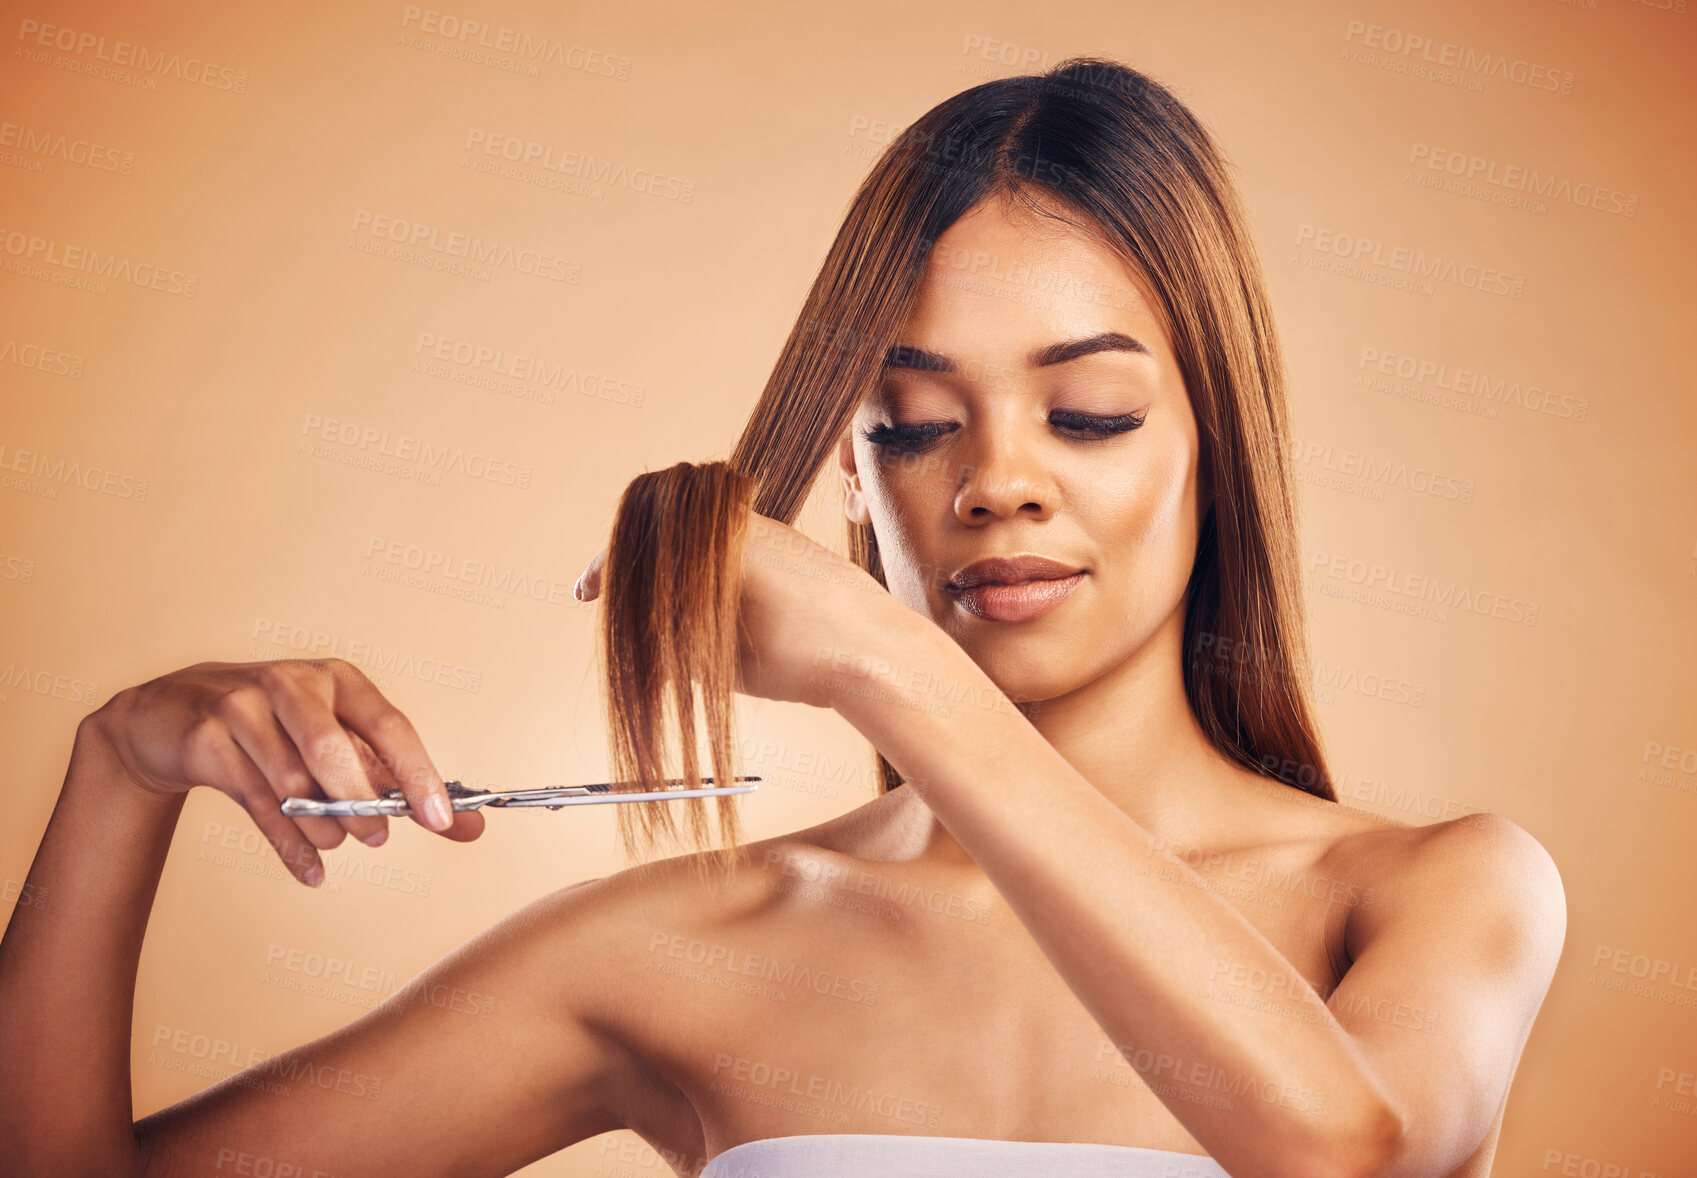 Buy stock photo Scissors, face and woman cut hair, split ends or doing hairstyle growth maintenance, self care routine or grooming treatment. Hairdressing product, beauty studio and model haircut on brown background